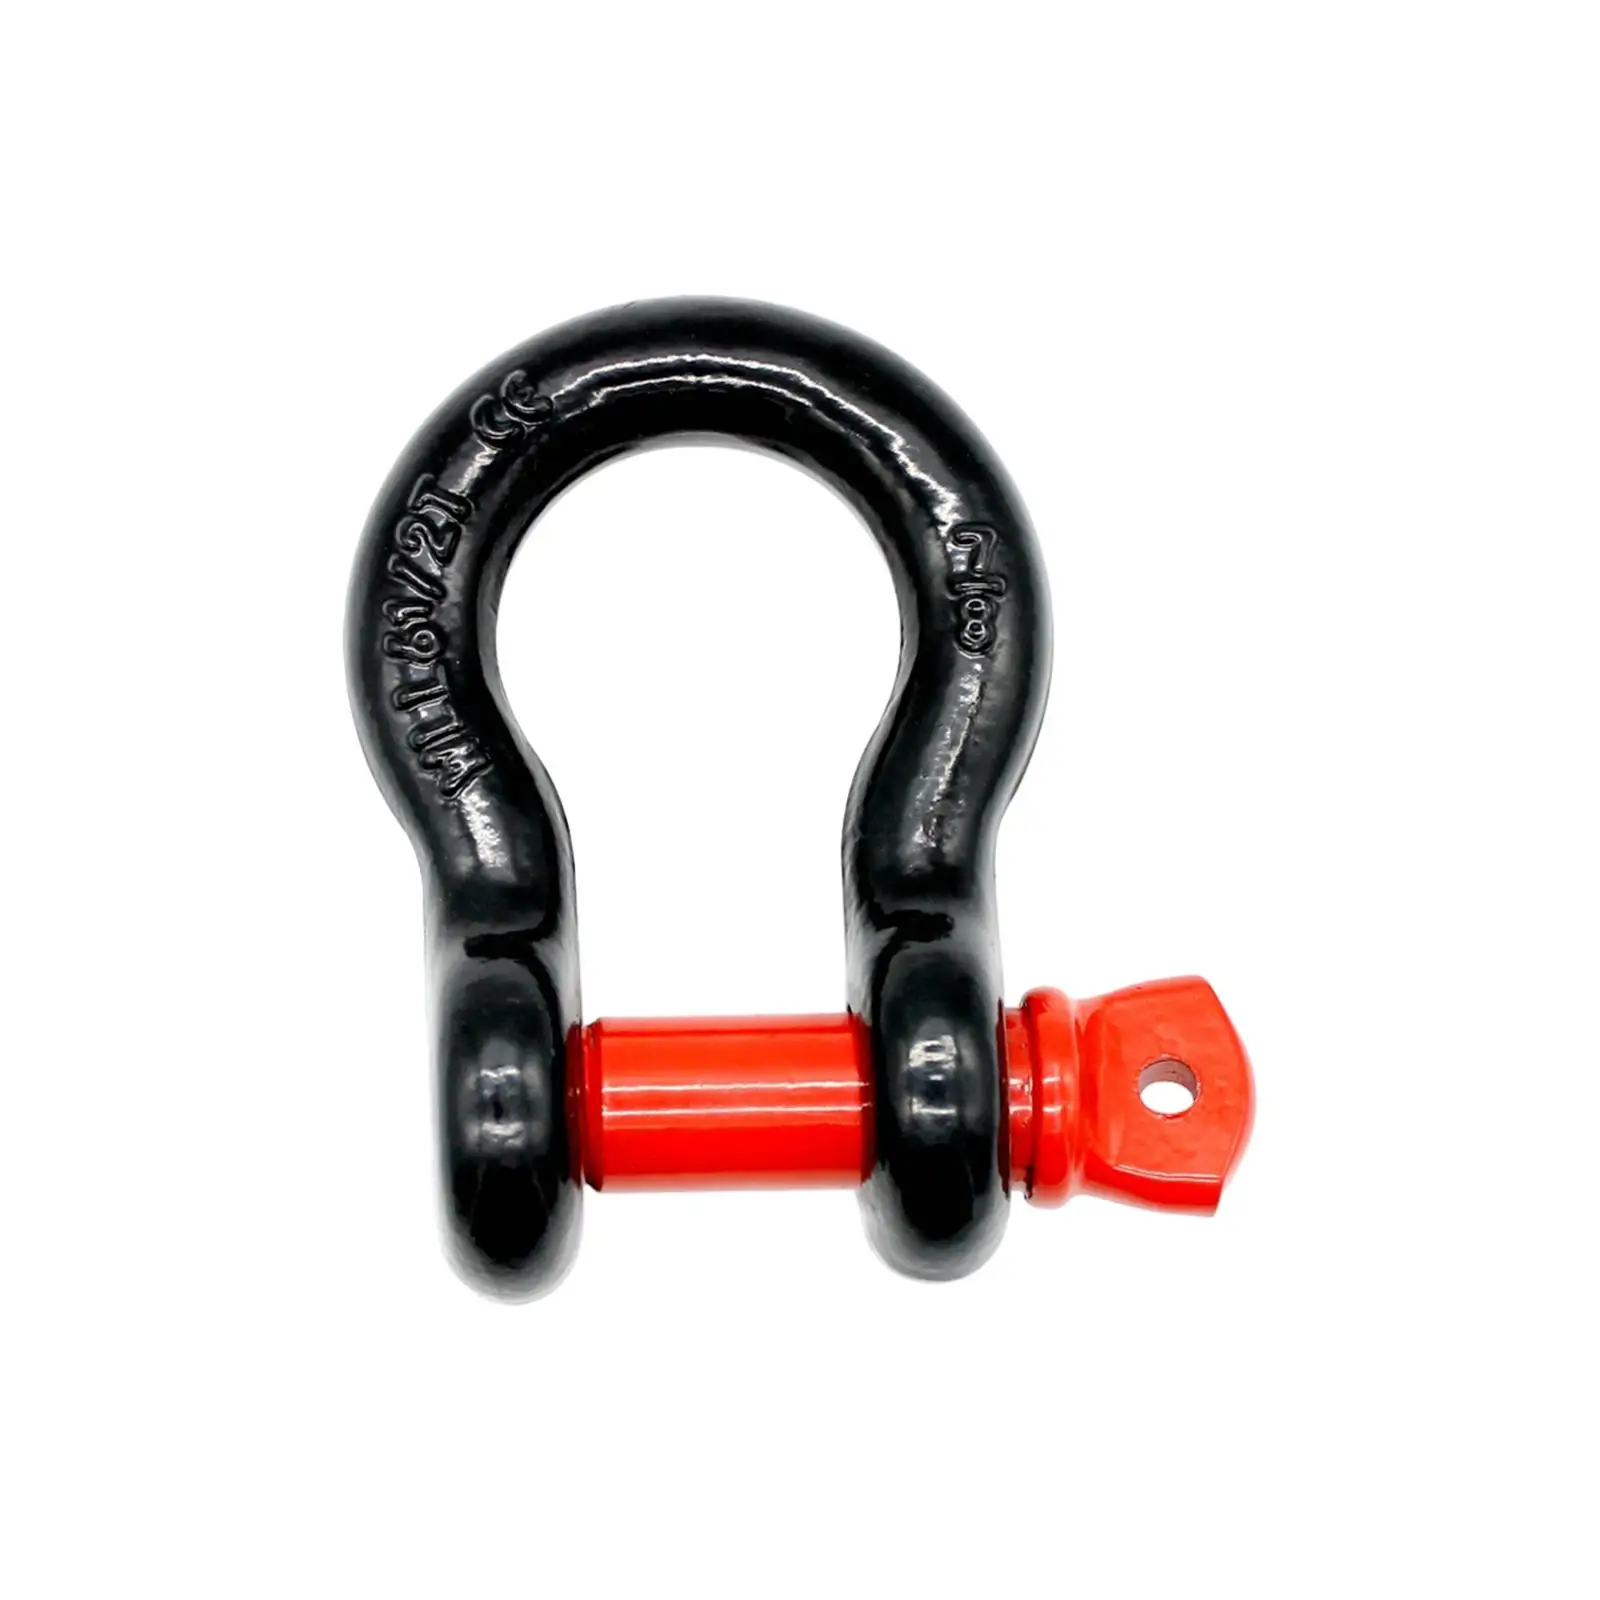 Tow Hook Heavy Duty Tow Rope Shackles for Truck Long Service Life